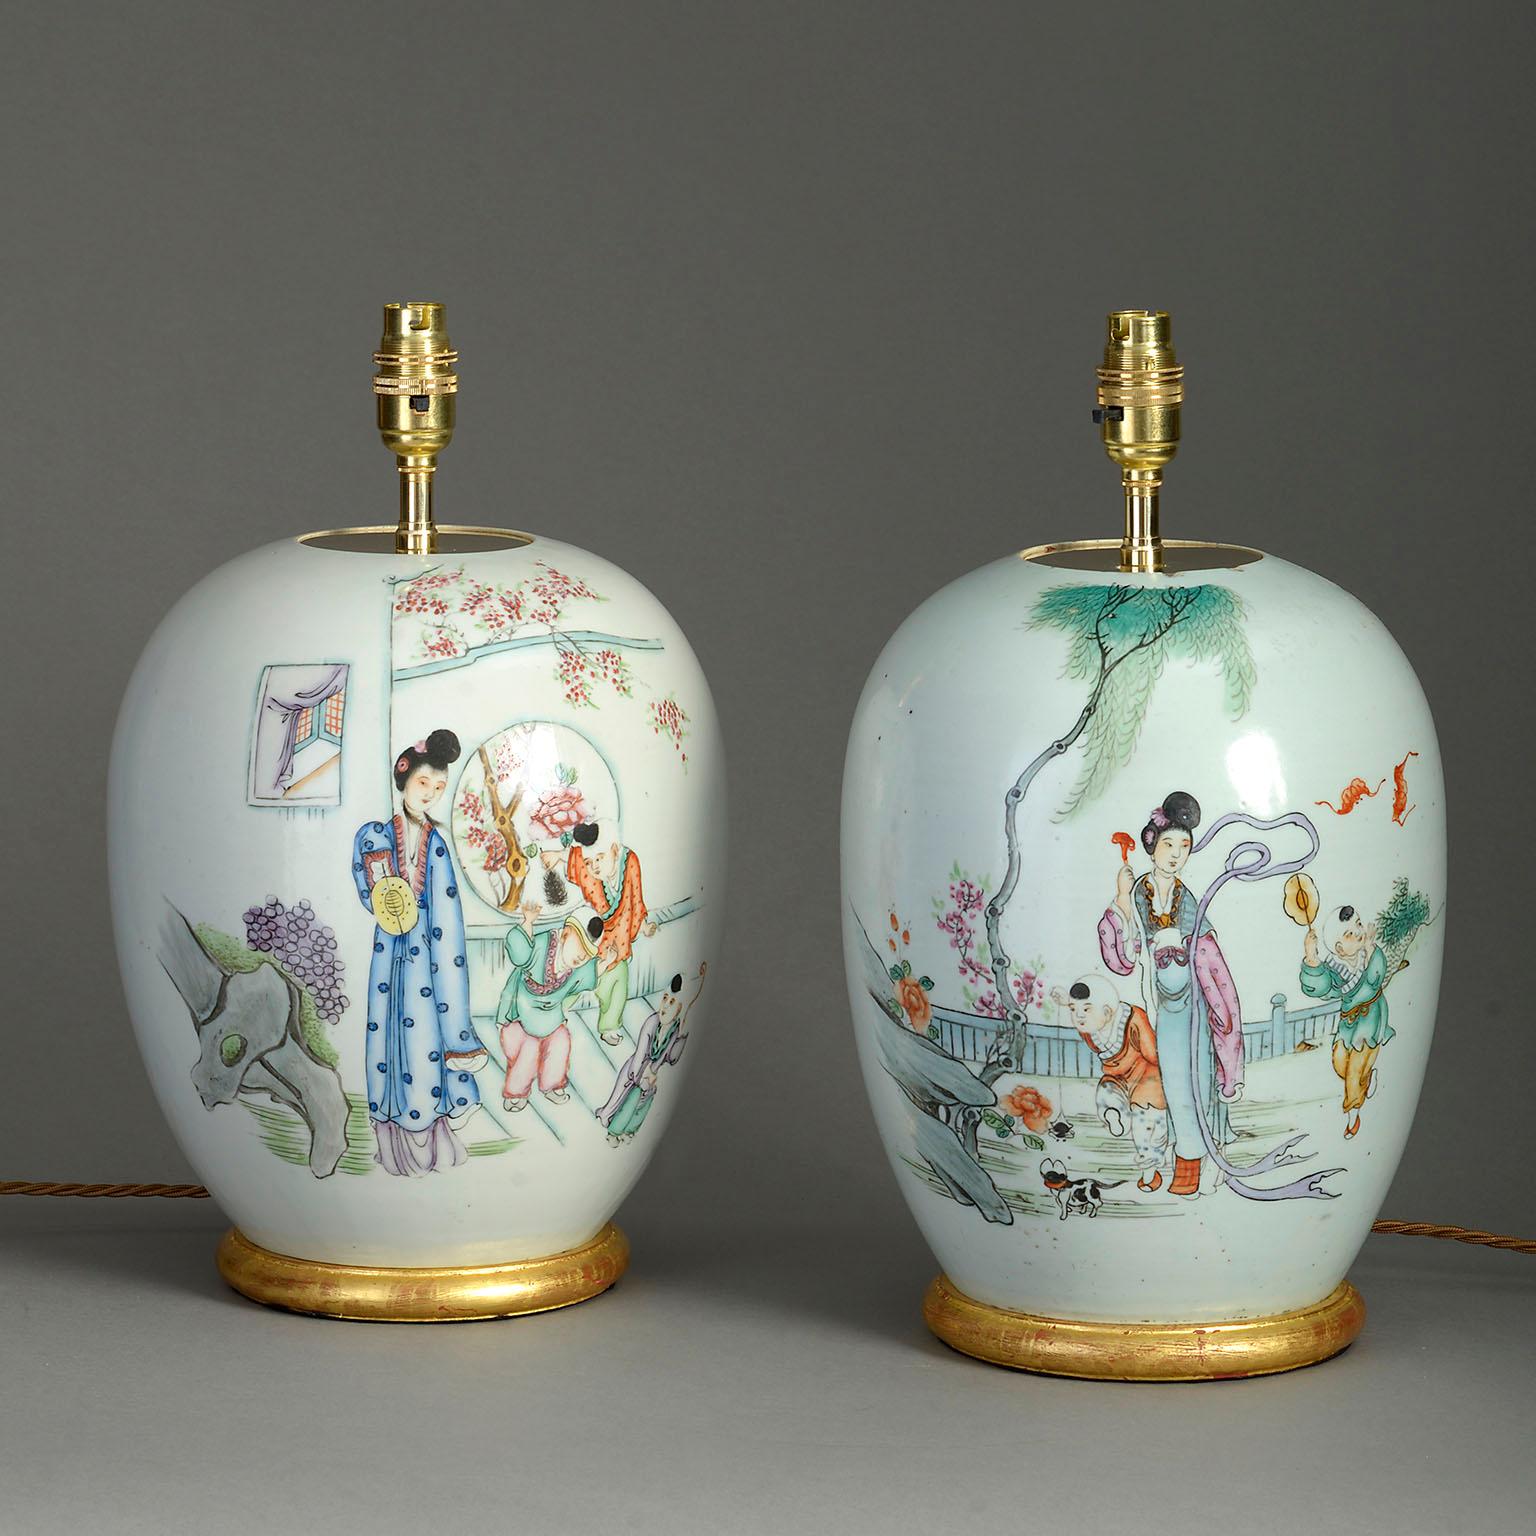 Chinese Pair of 20th Century Republic Period Figurative Porcelain Jar Lamps